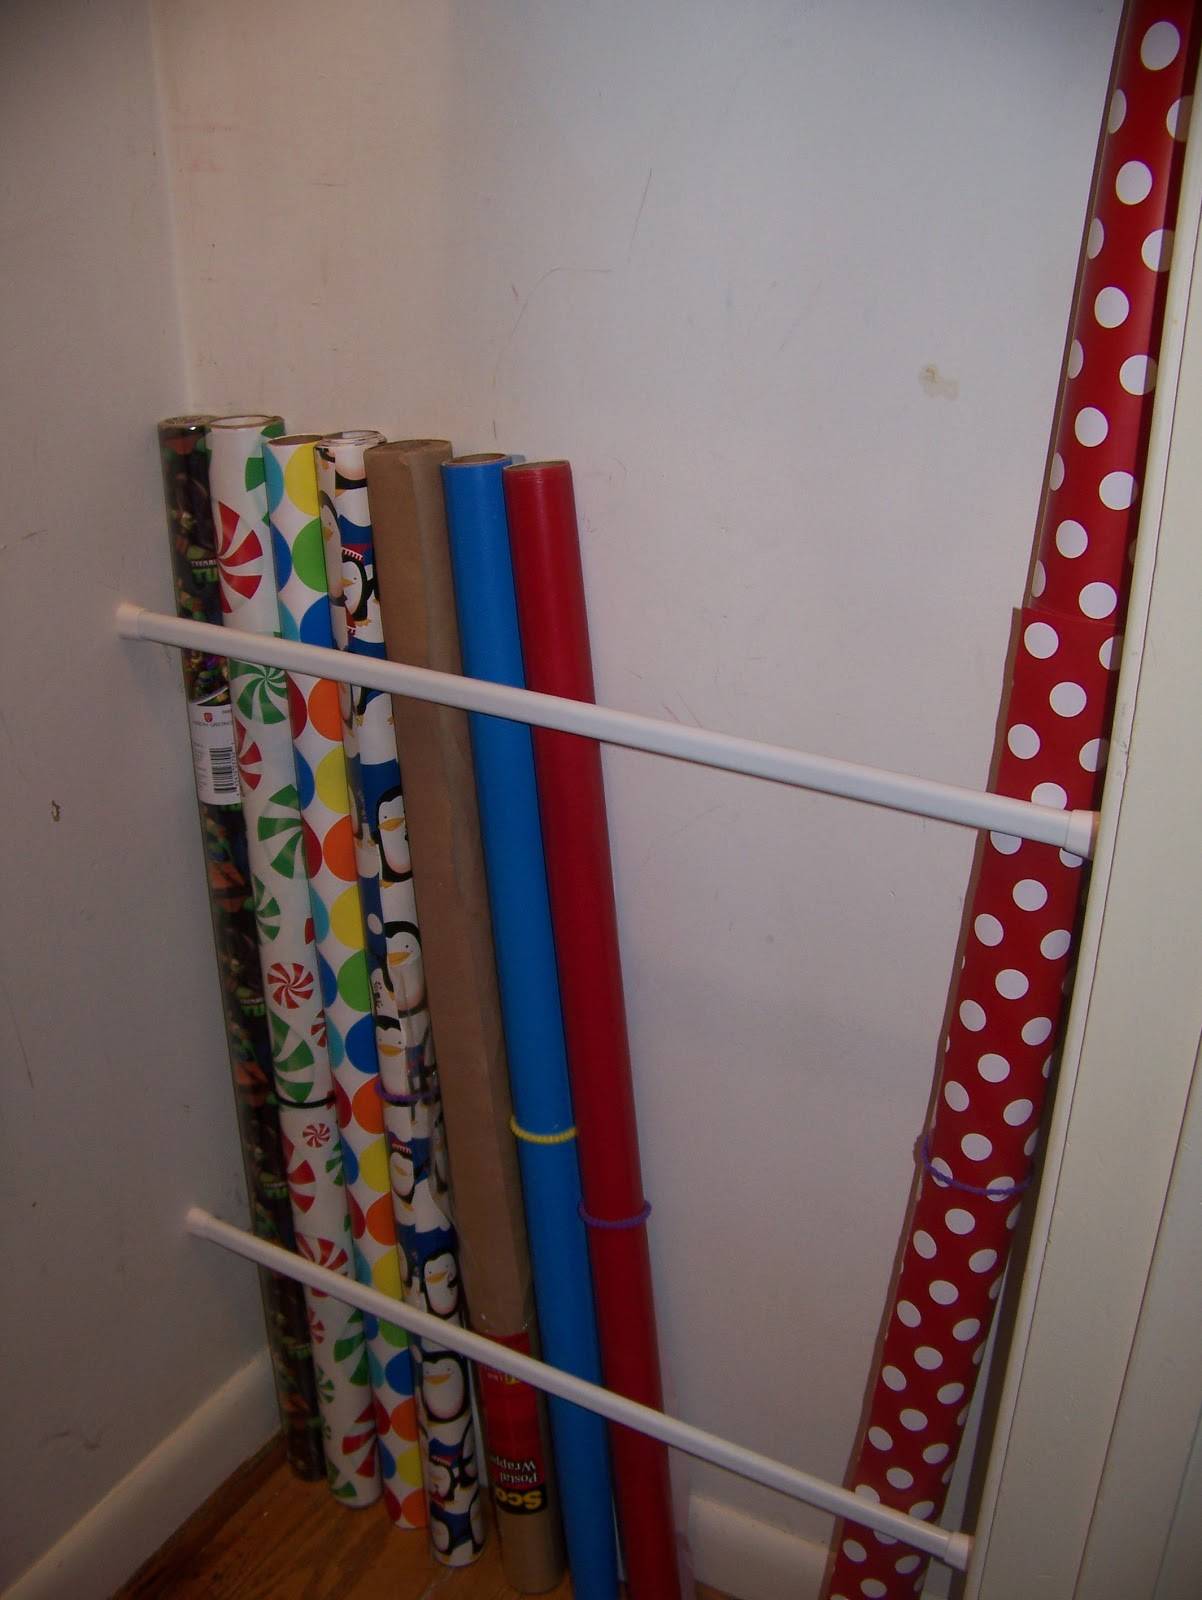 20+ Creative Uses of Tension Rods to Organize Your Home --> Use Tension Rod to Store Wrapping Paper Vertically and Keep Them Organized in the Closet